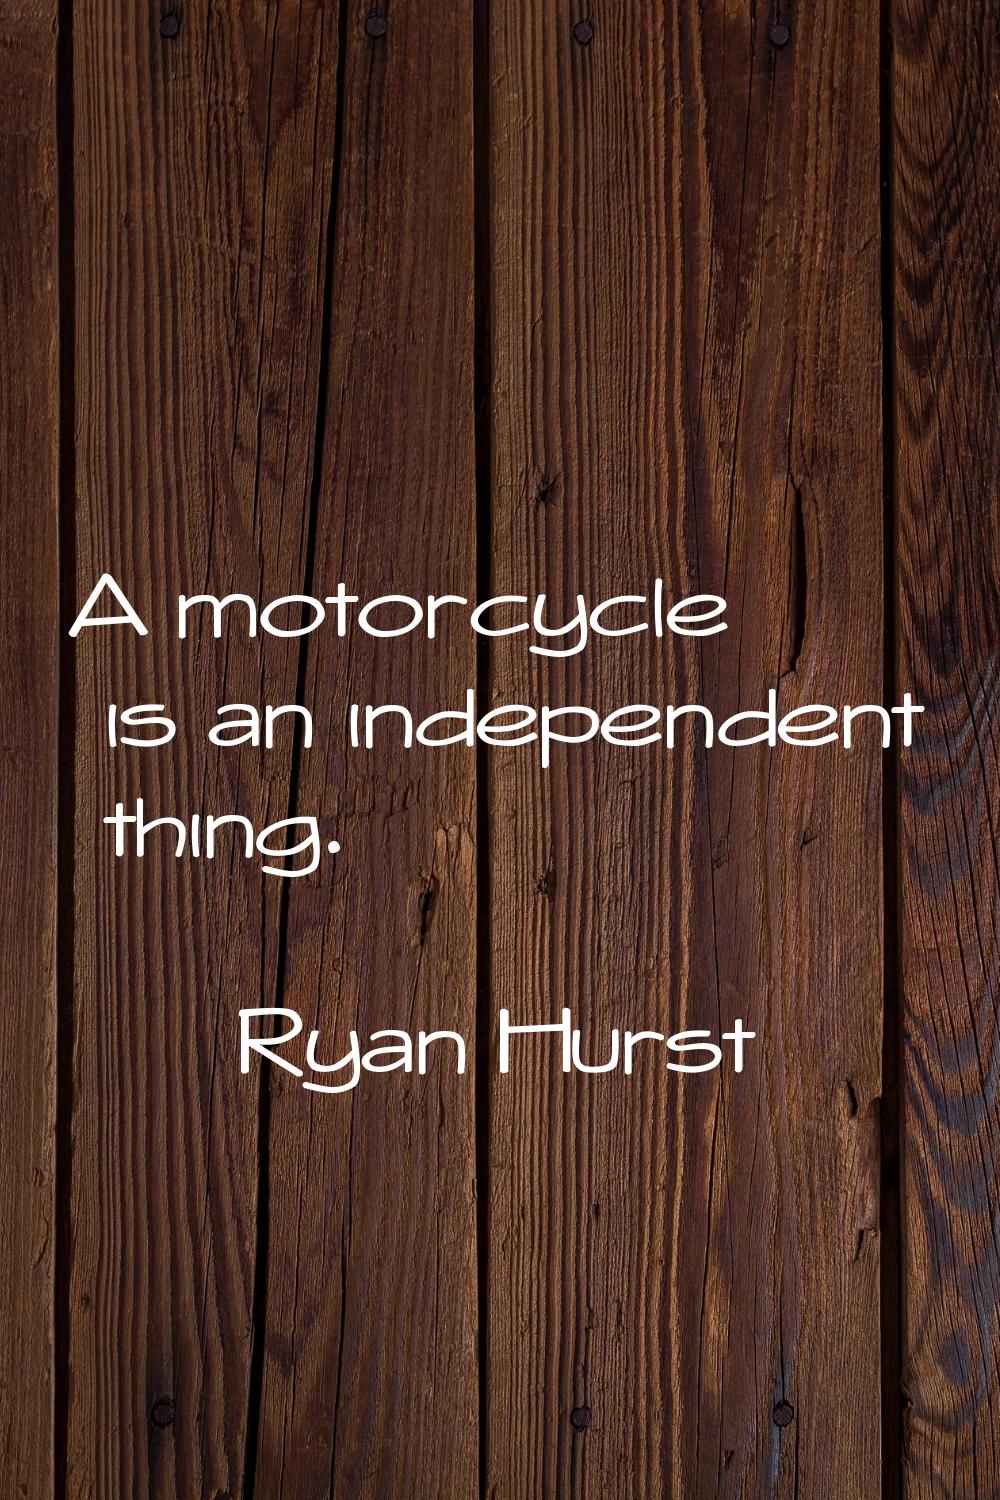 A motorcycle is an independent thing.